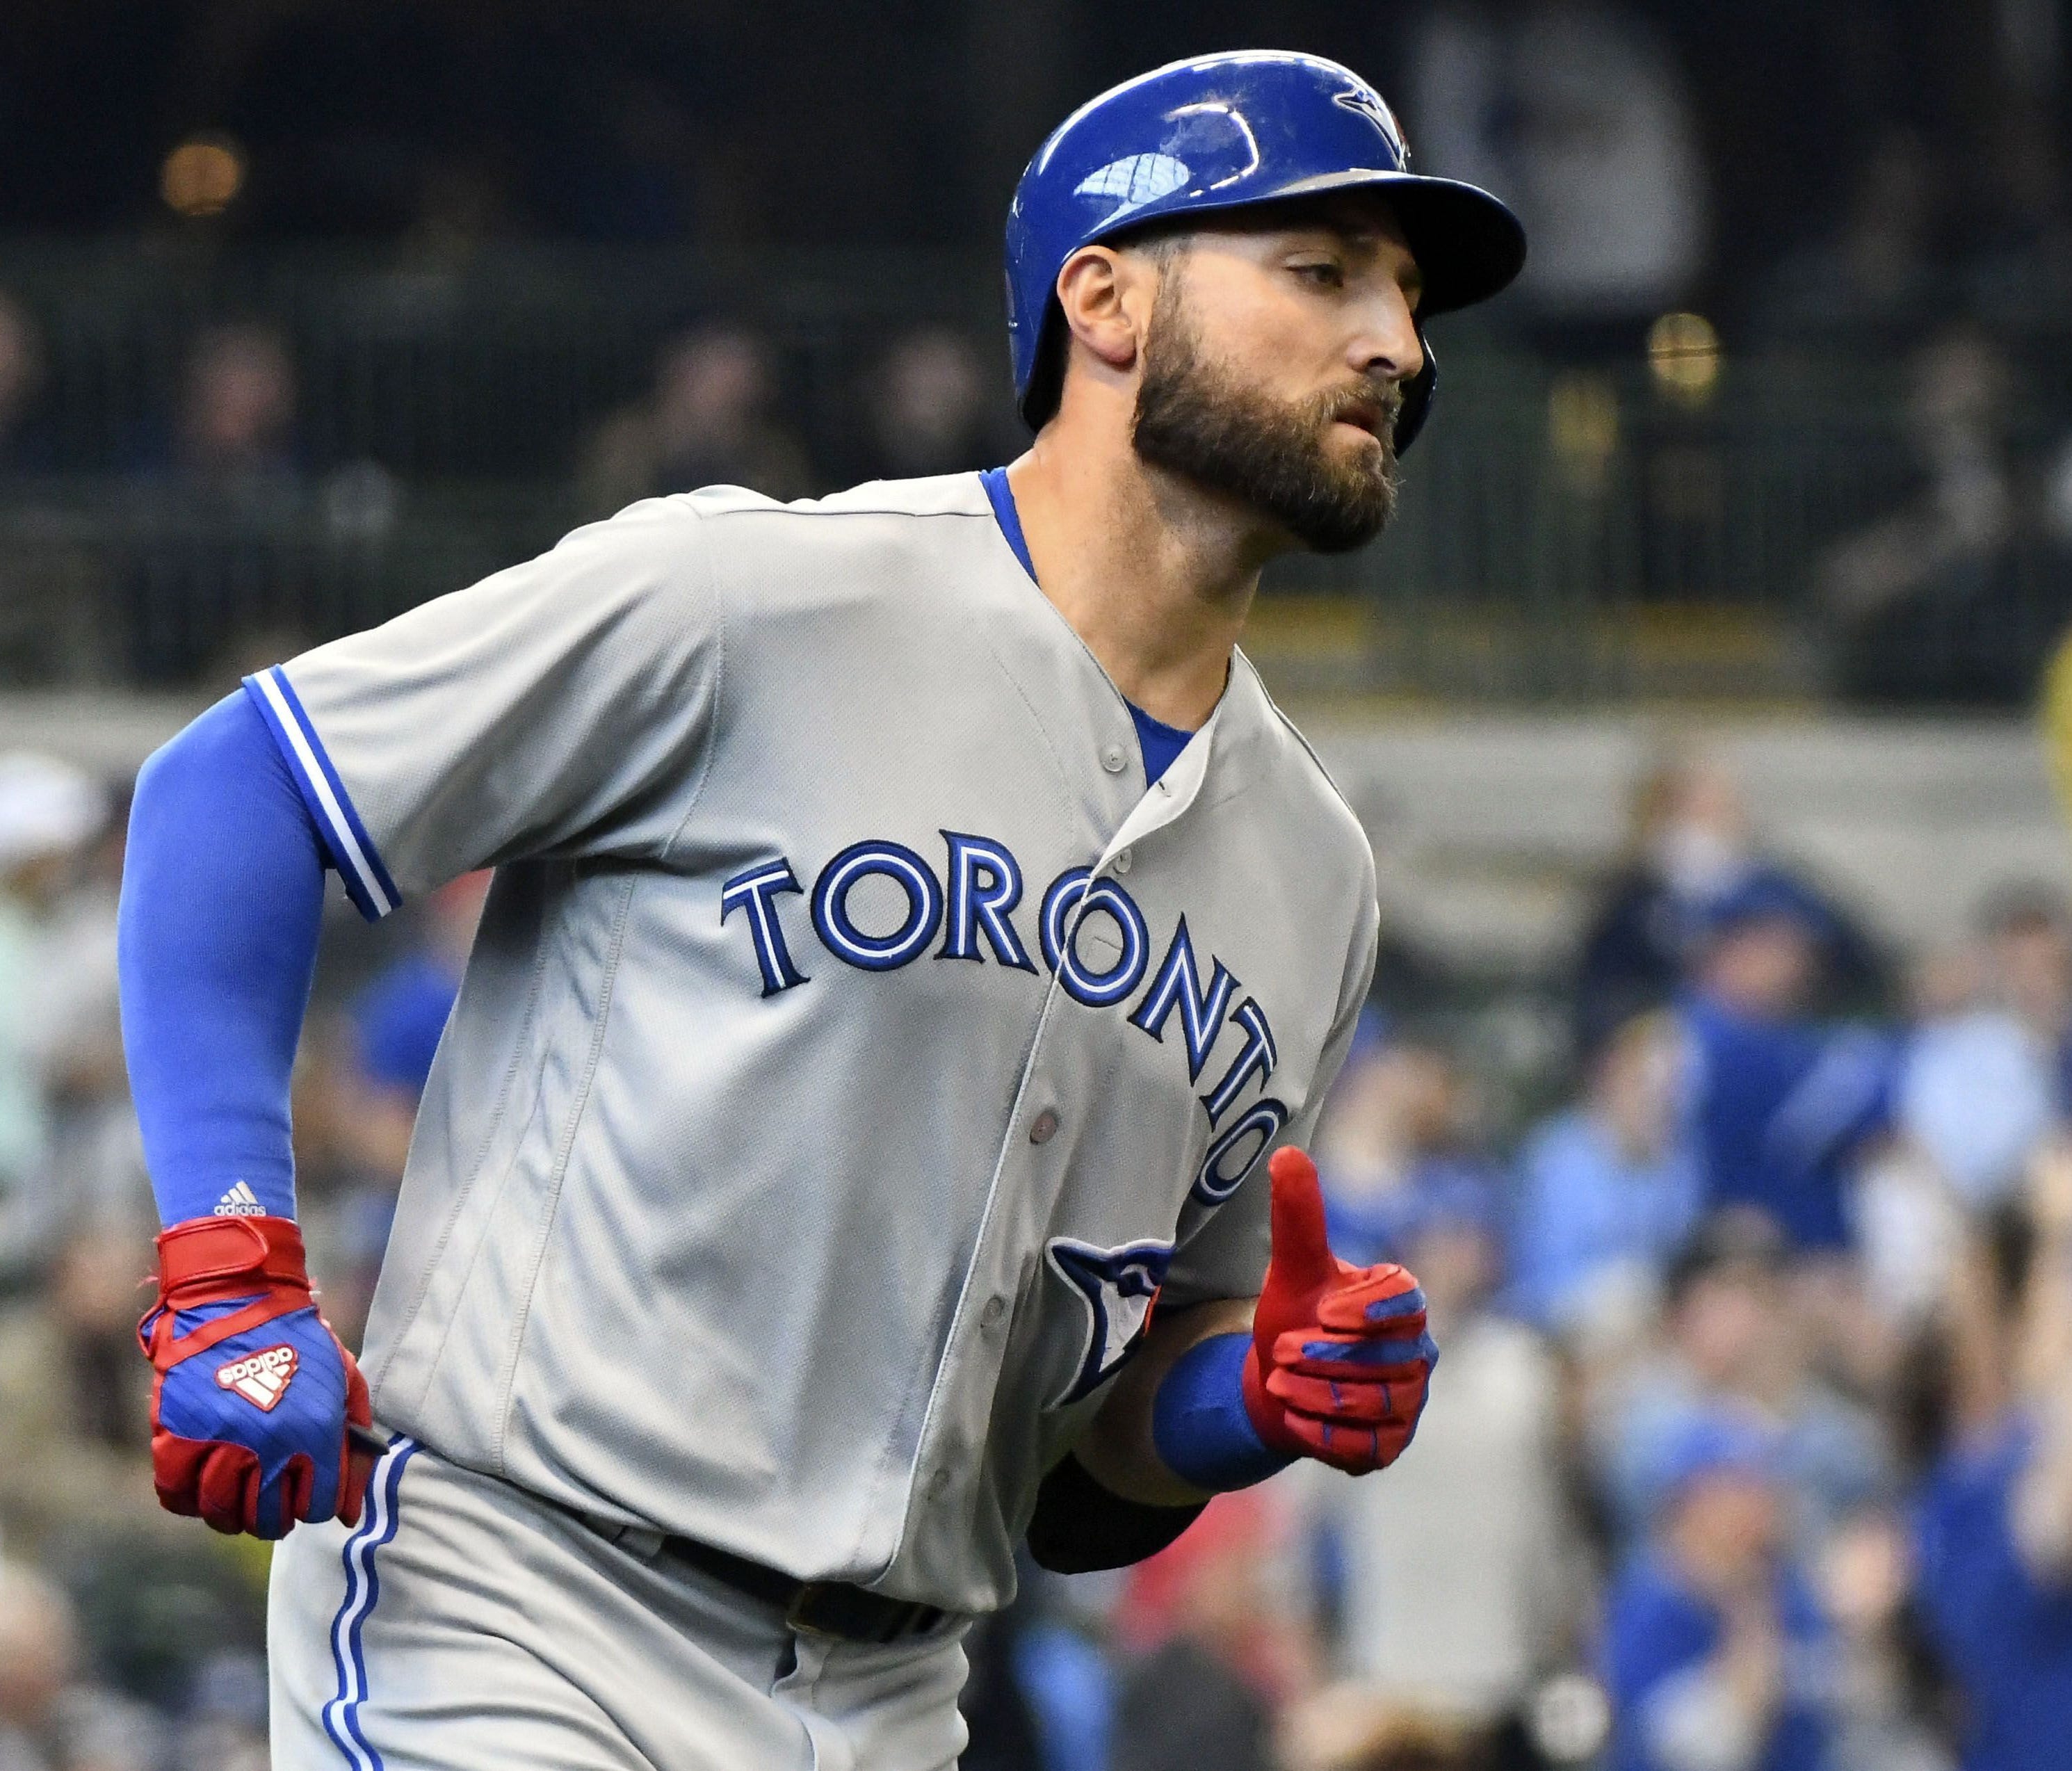 Toronto's Kevin Pillar will be making donations to two LGBT organizations.